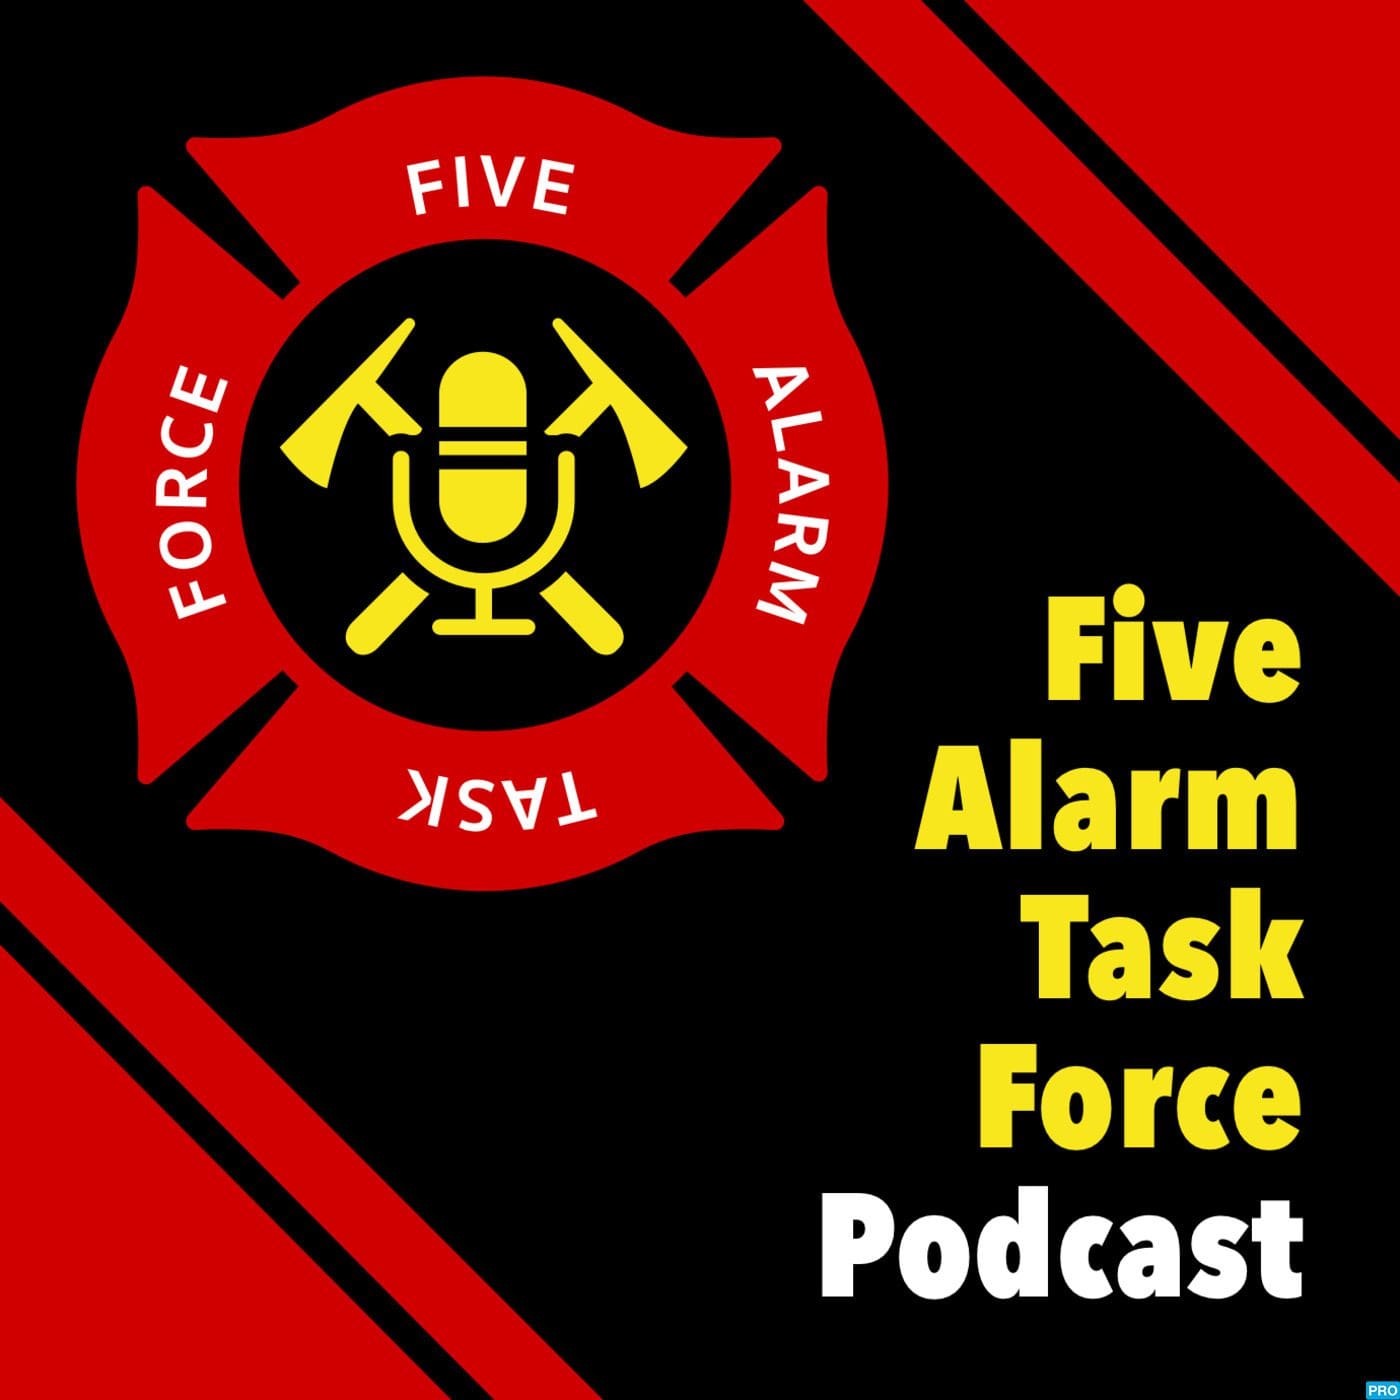 Fire Alarm Task Force Podcast